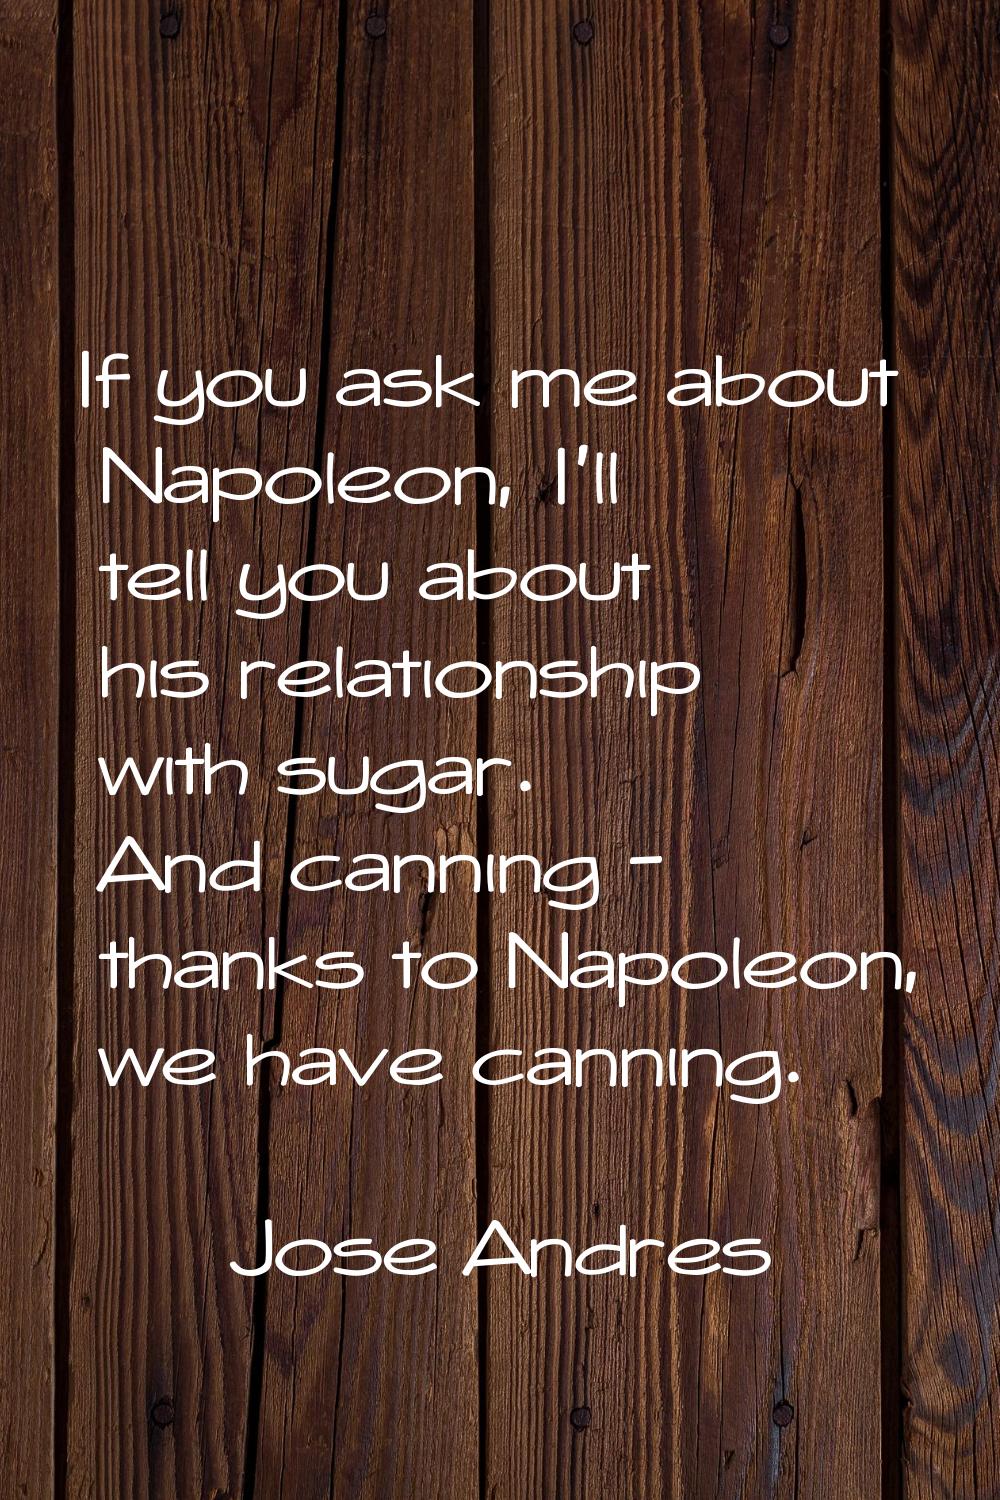 If you ask me about Napoleon, I'll tell you about his relationship with sugar. And canning - thanks